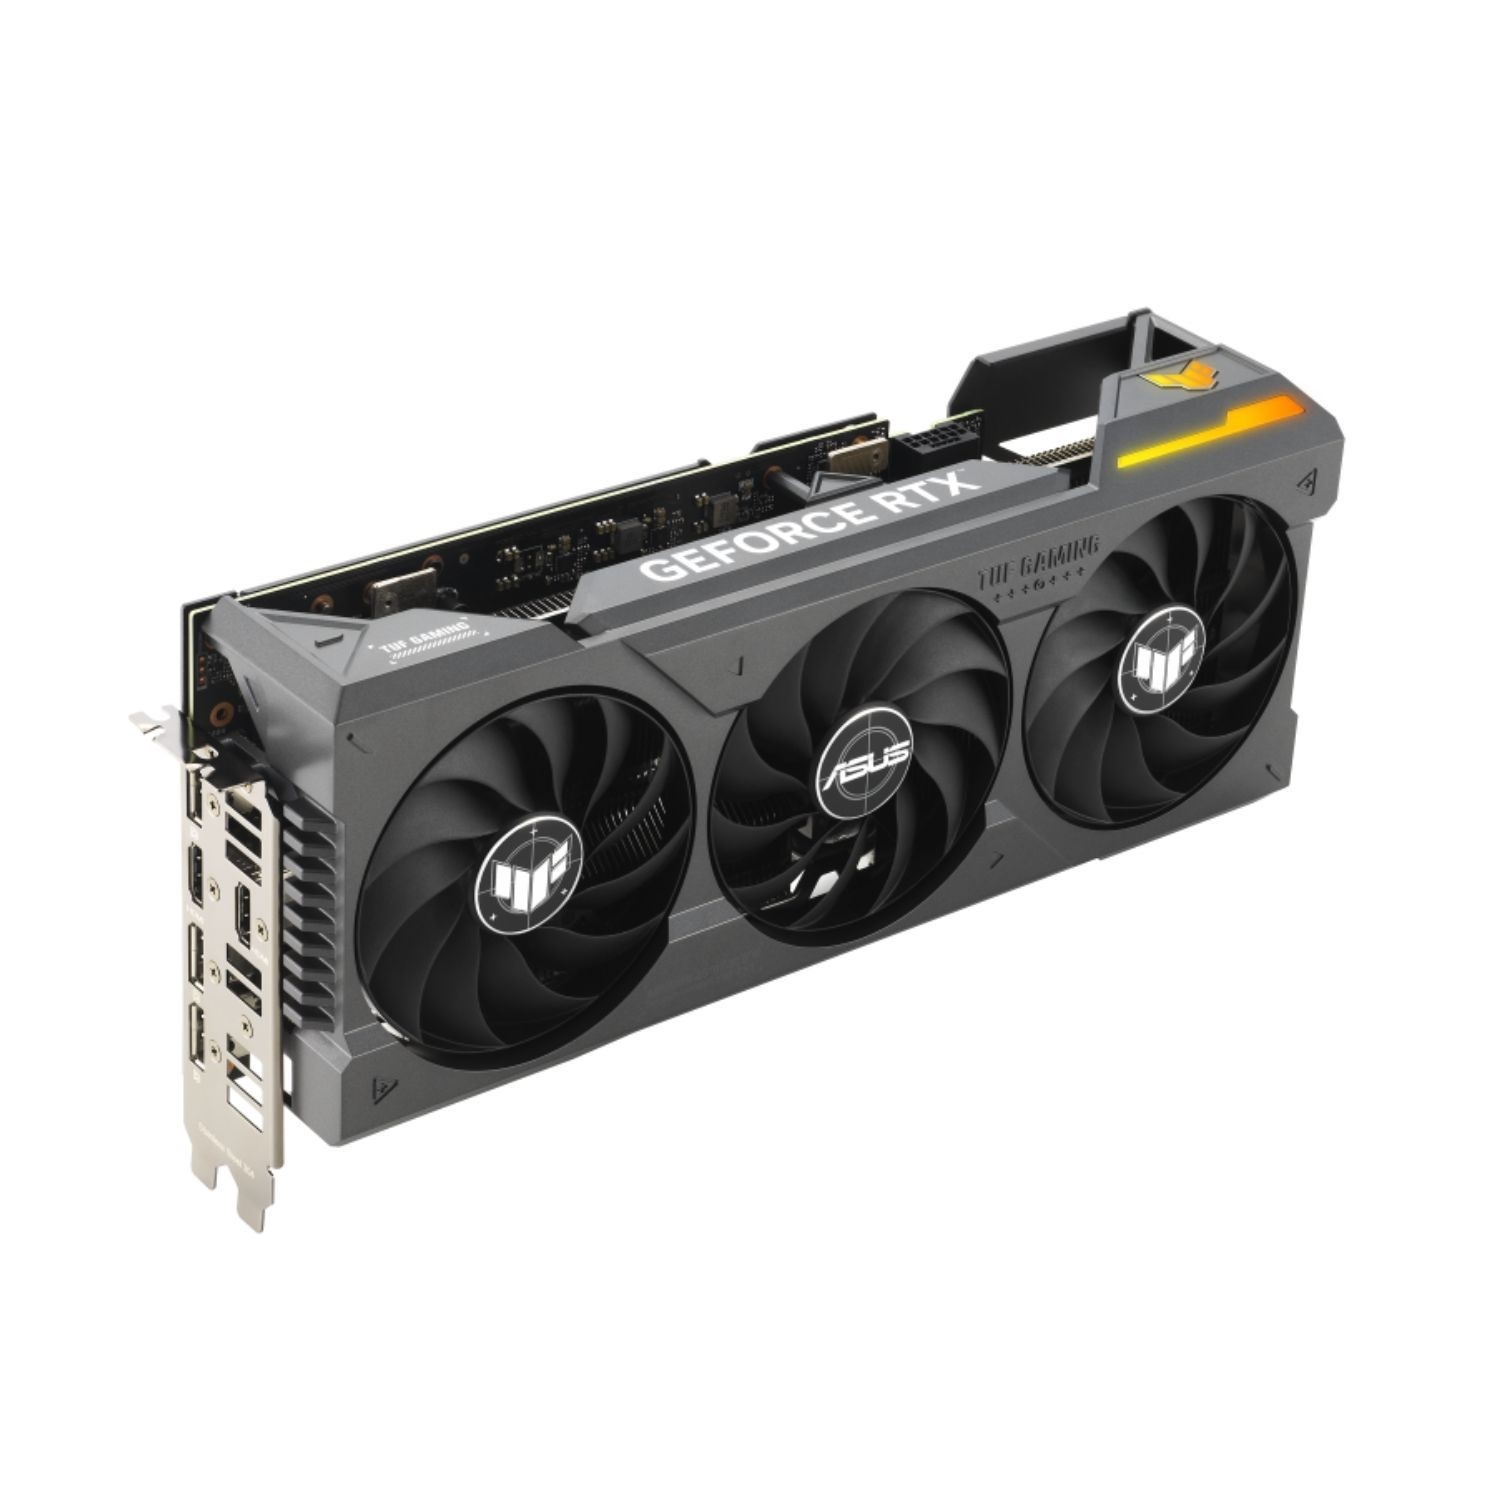 rtx 4070 asus dual, does this gpu requires a gpu support stand/bracket or  something of the sort?